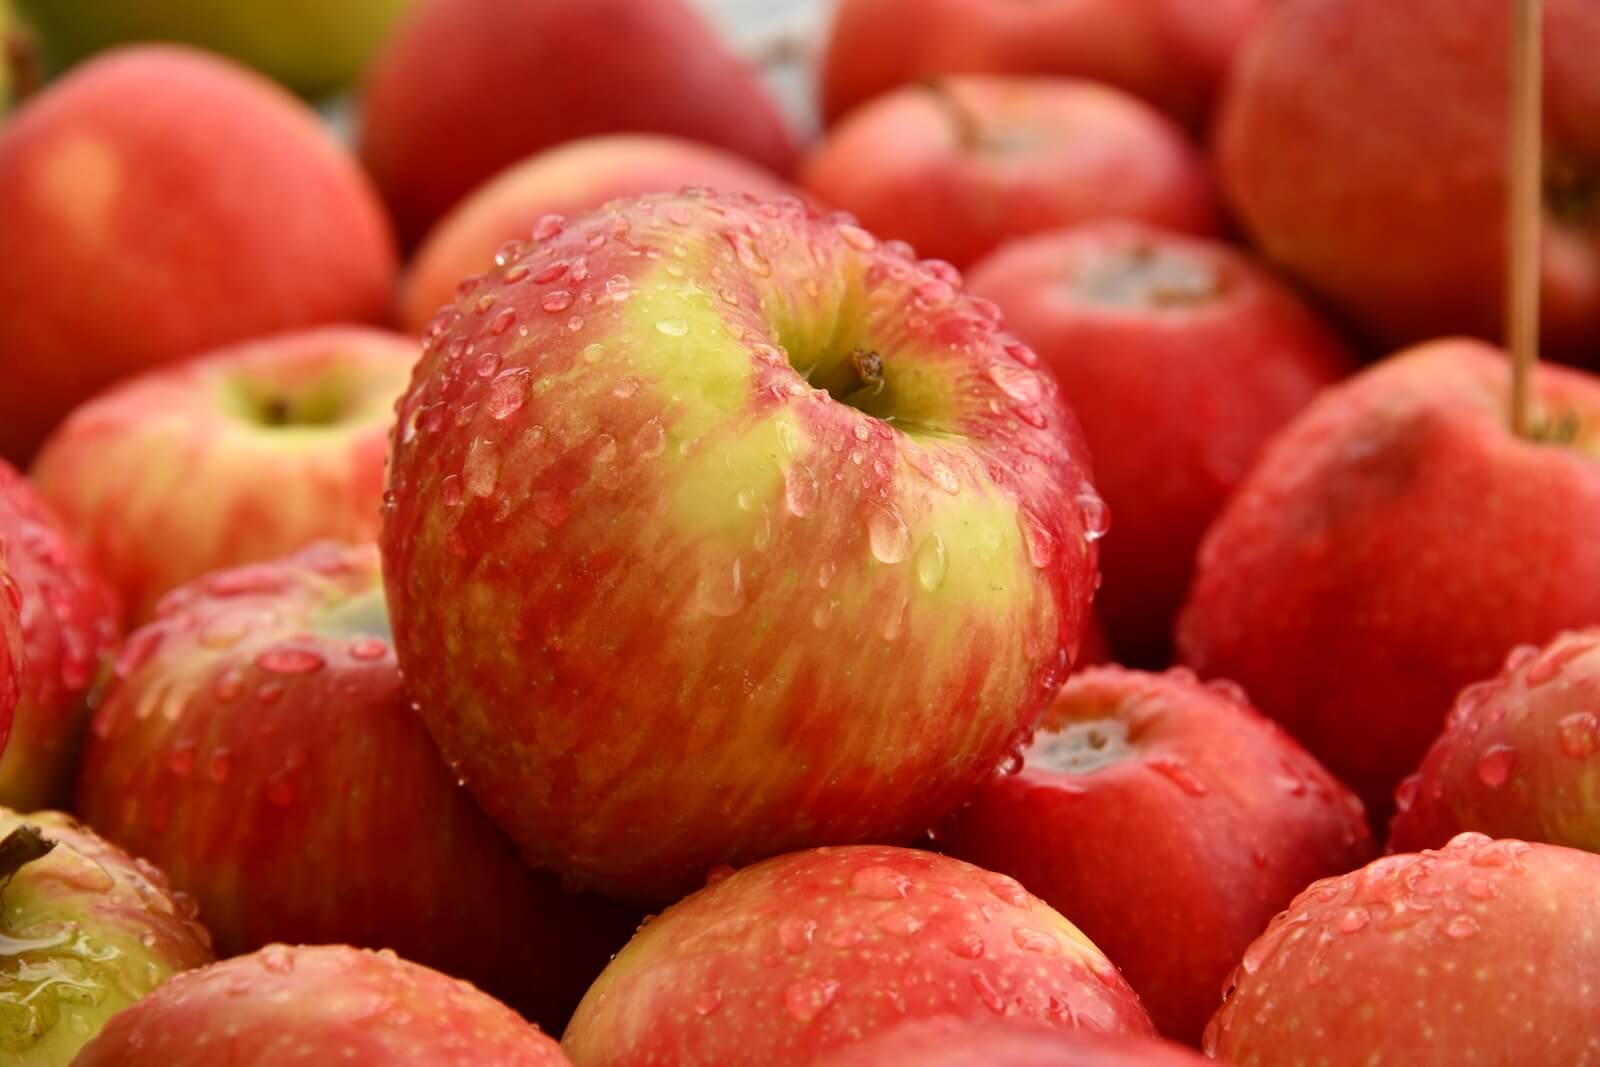 An apple a day keeps frailty away, study shows - Study Finds